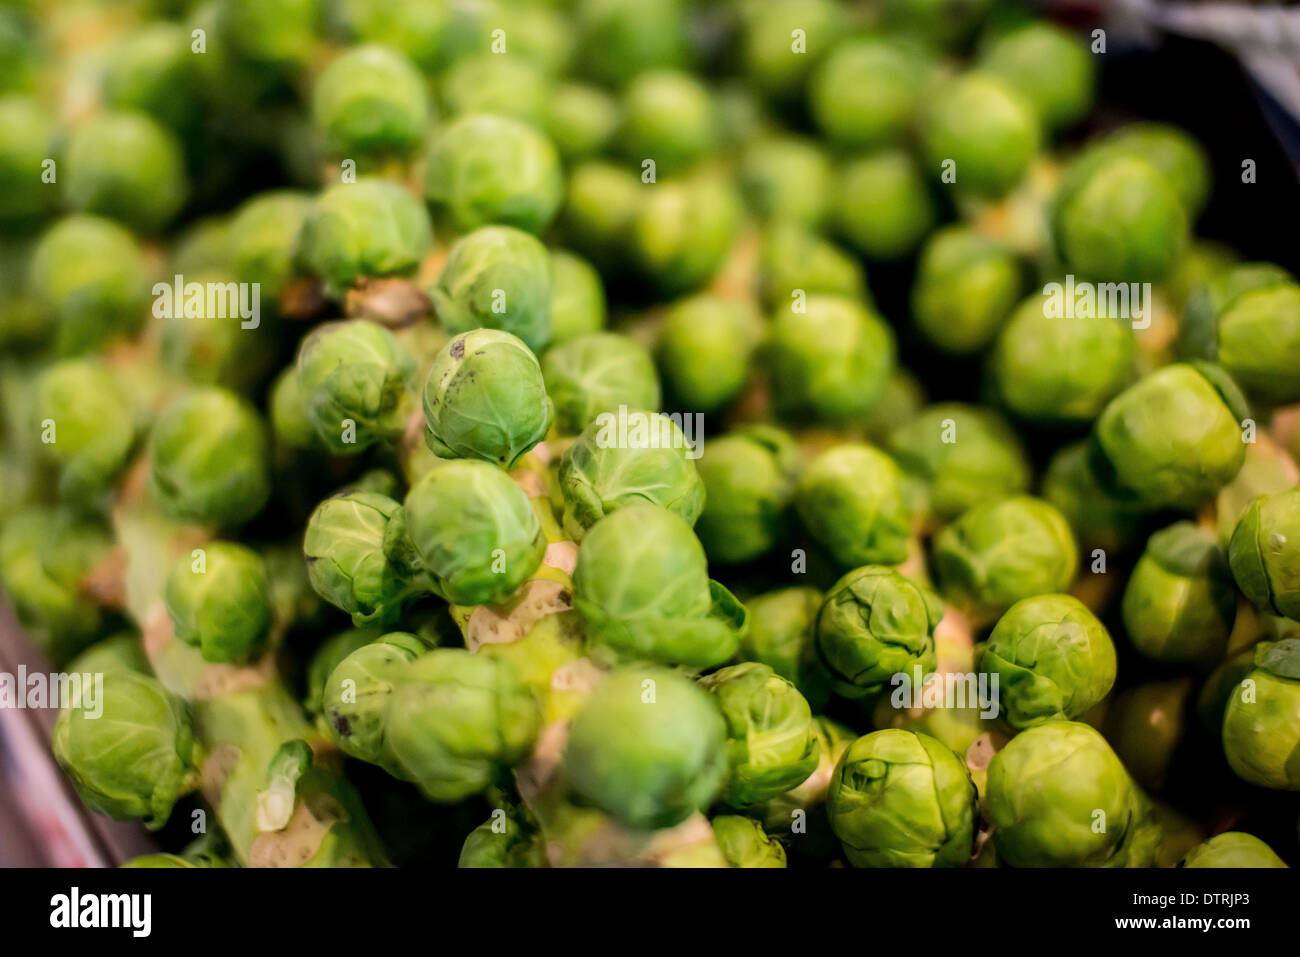 Darren Cool Images  Brussels sprouts on display in batches at a supermarket. Commonly these are associated with a christmas meal Stock Photo